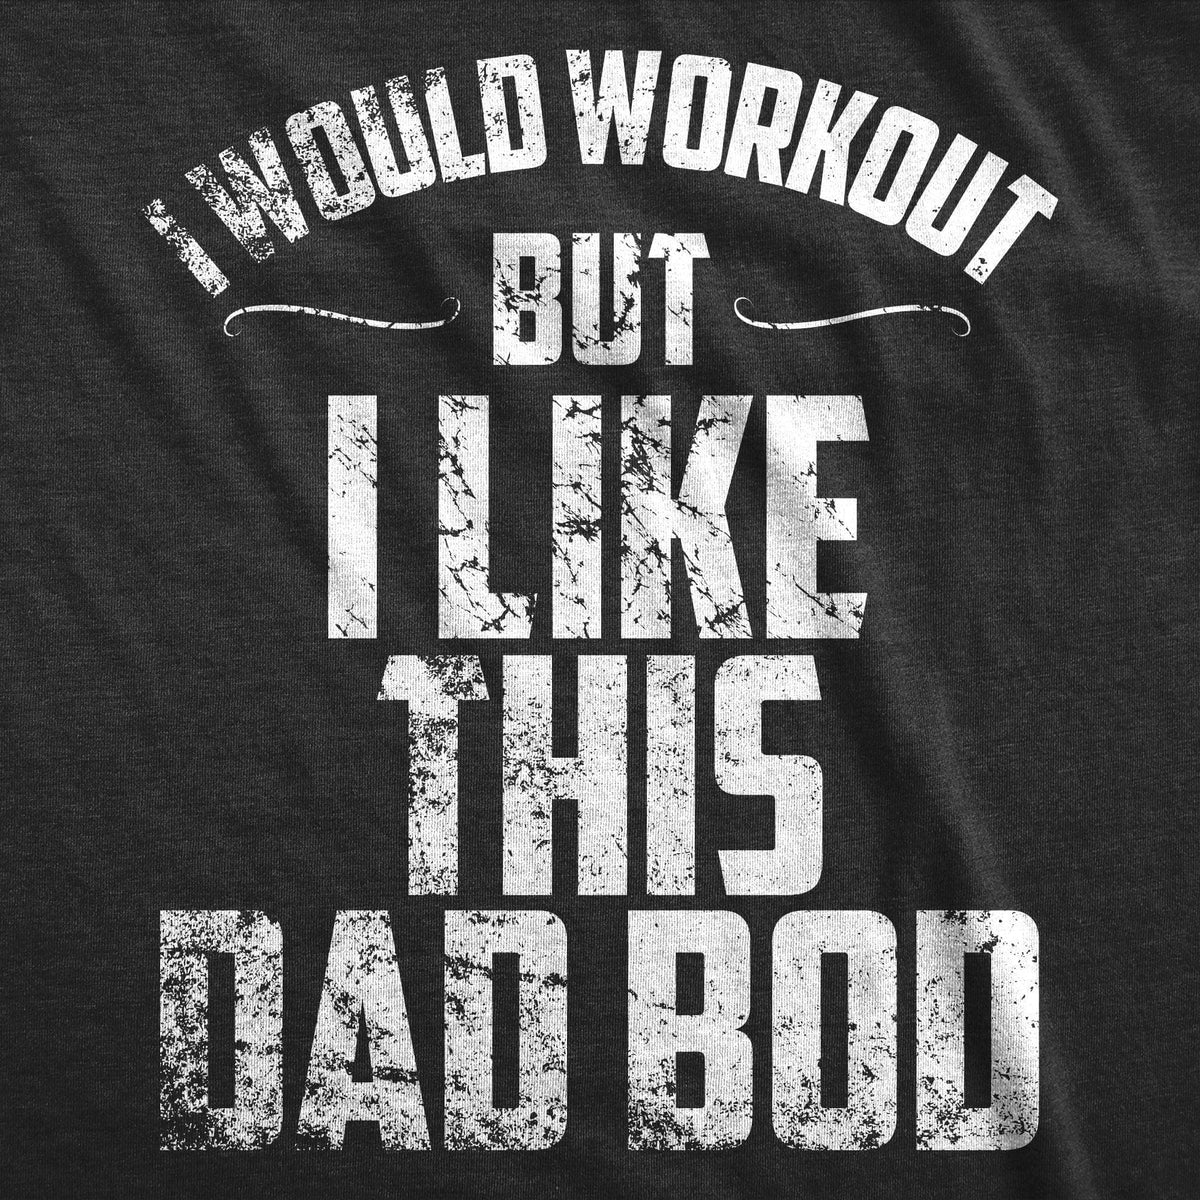 I Would Workout But I Like This Dad Bod Men&#39;s Tshirt  -  Crazy Dog T-Shirts